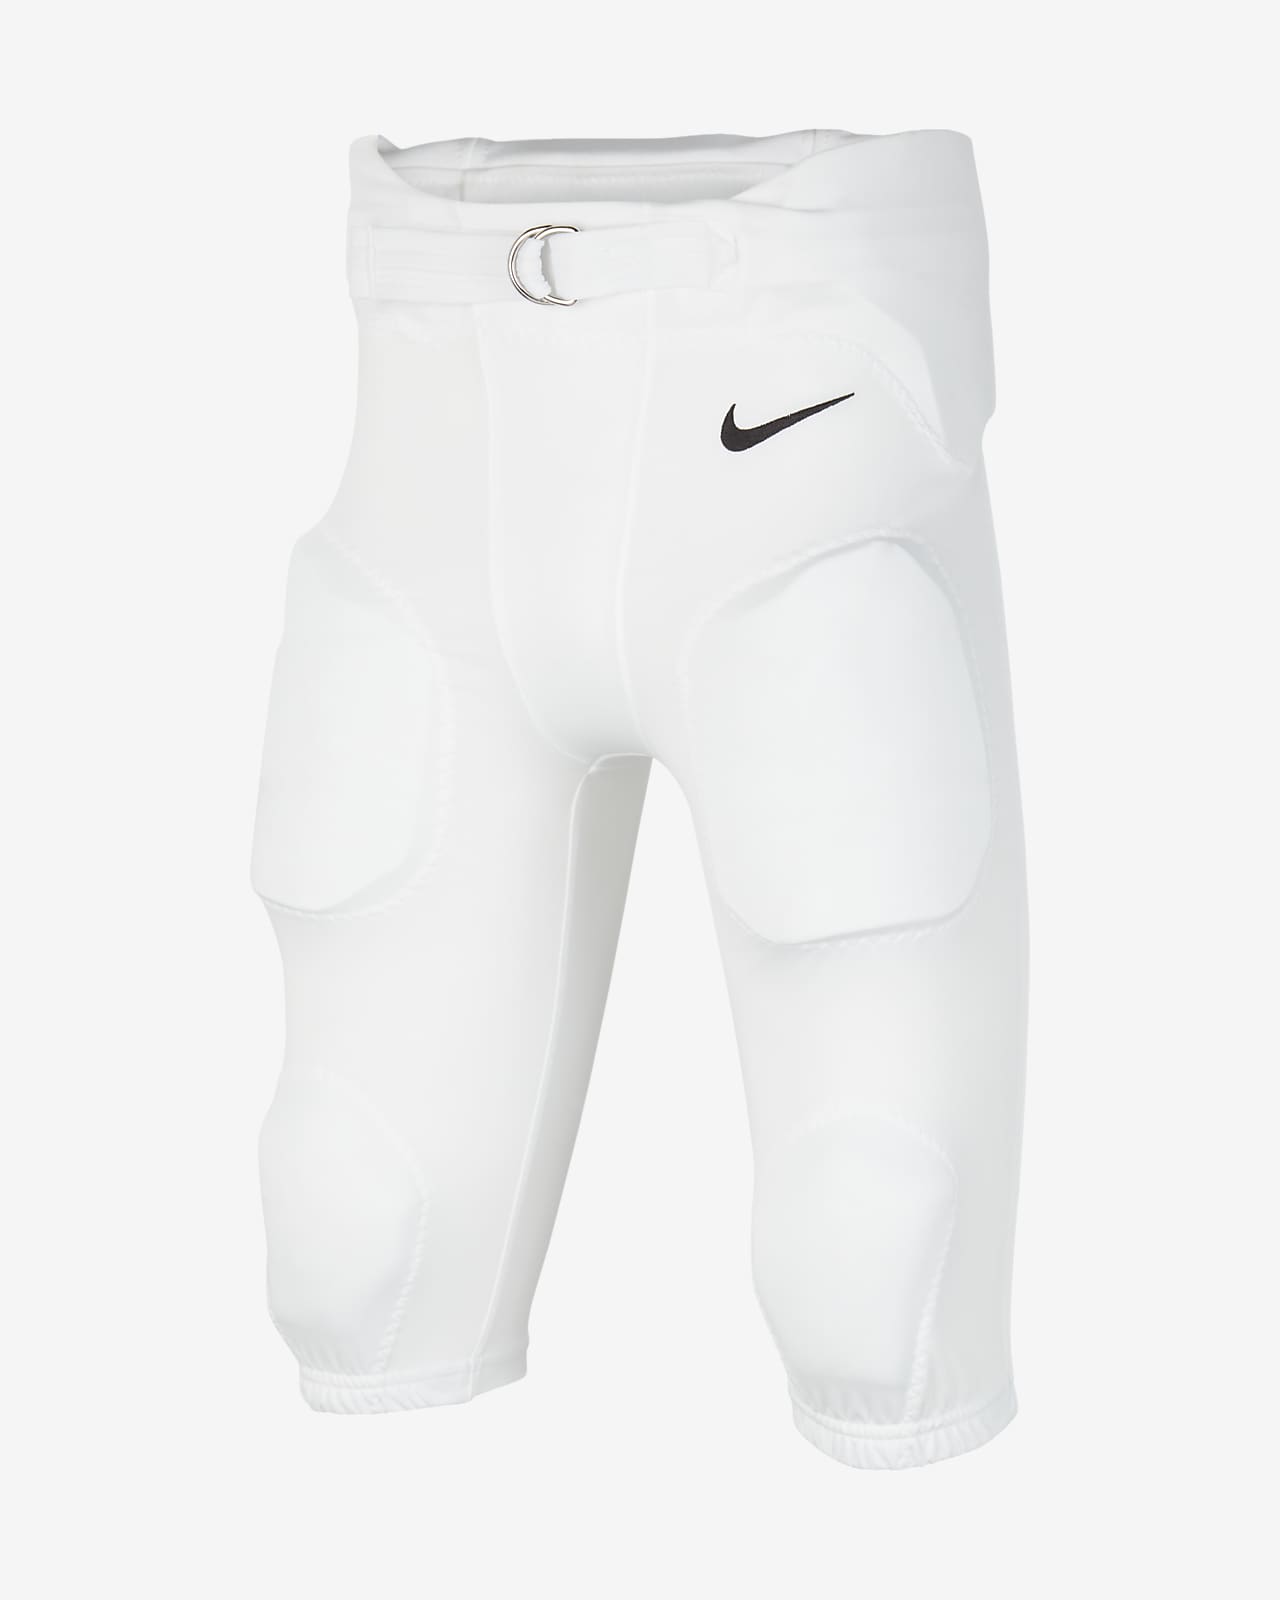 Nike Youth Recruit Integrated 3.0 Football Pants, Size: Large, White